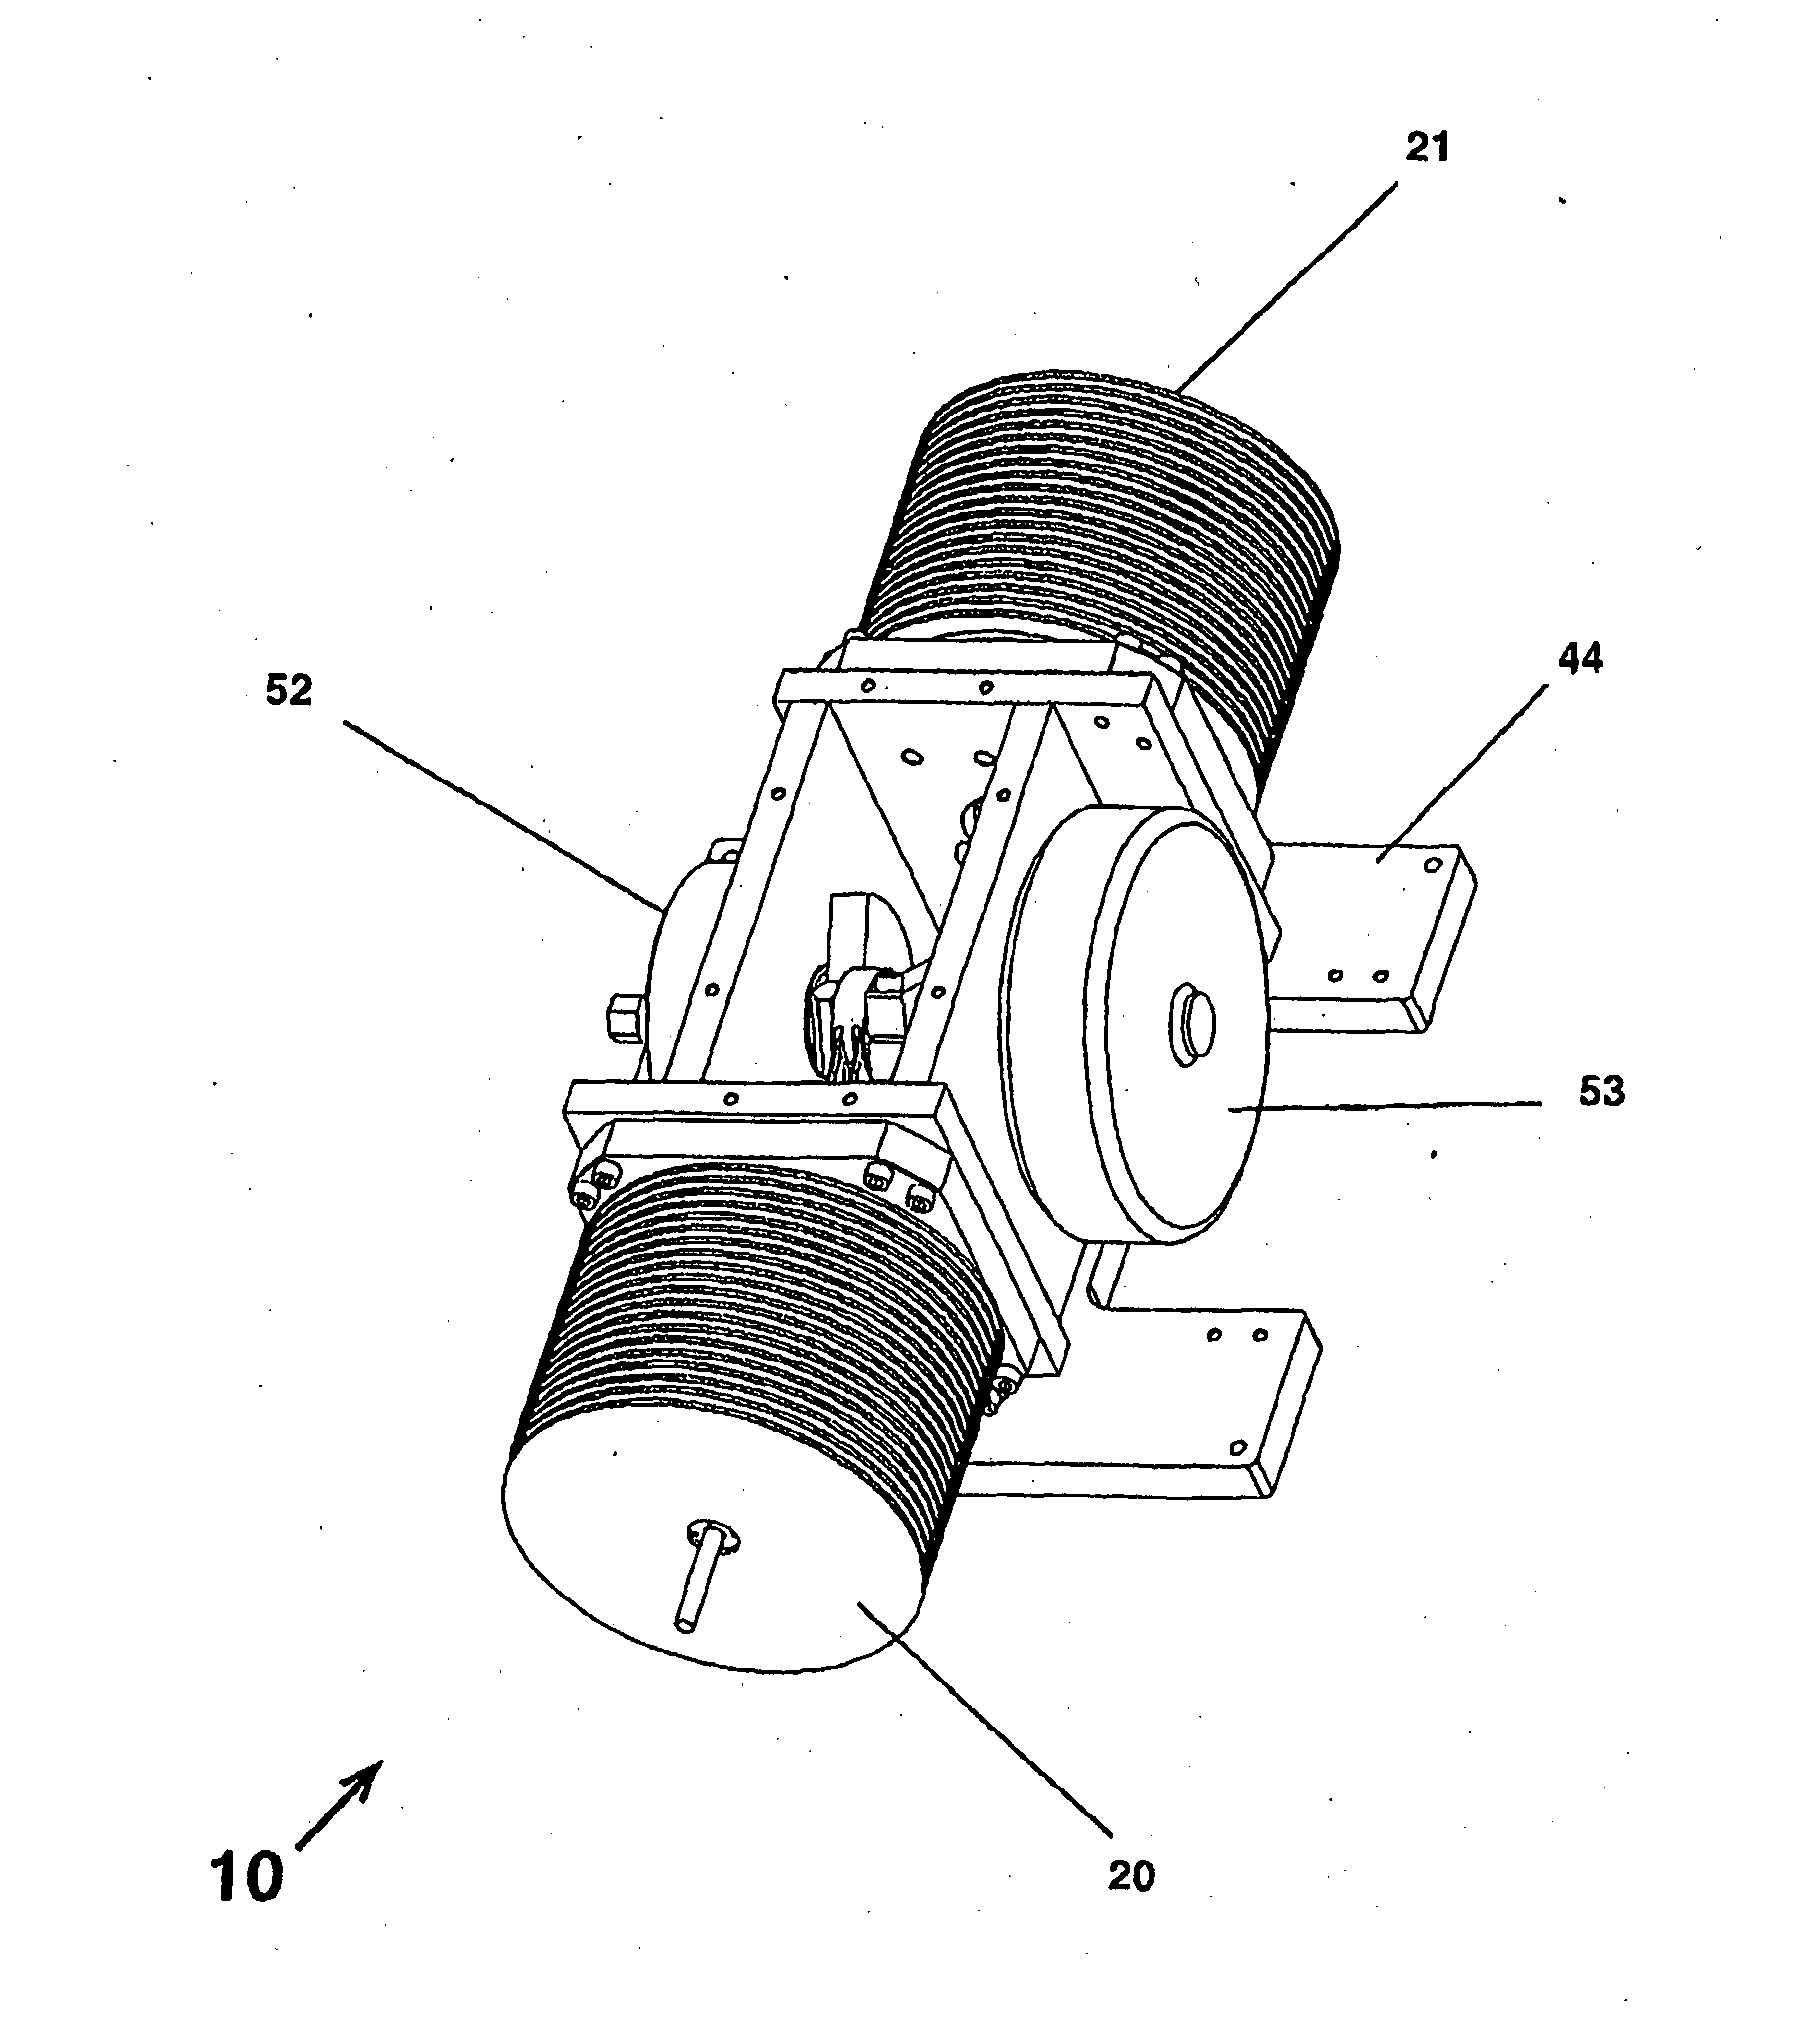 Method and Apparatus for Converting Between Electrical and Mechanical Energy